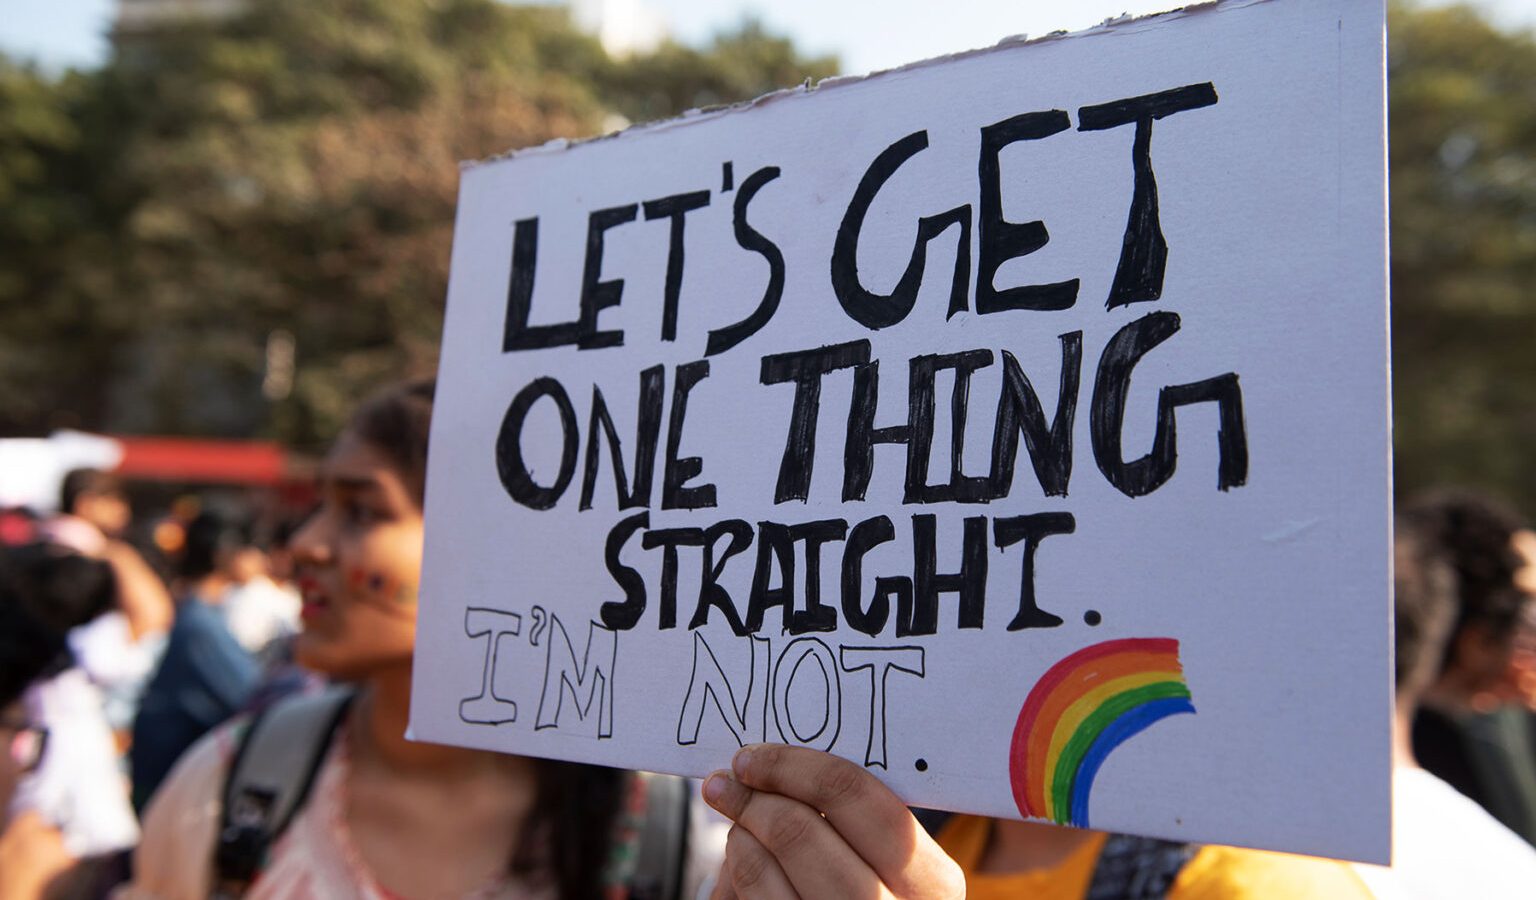 Protest sign that says "let's get one thing straight - I'm not"